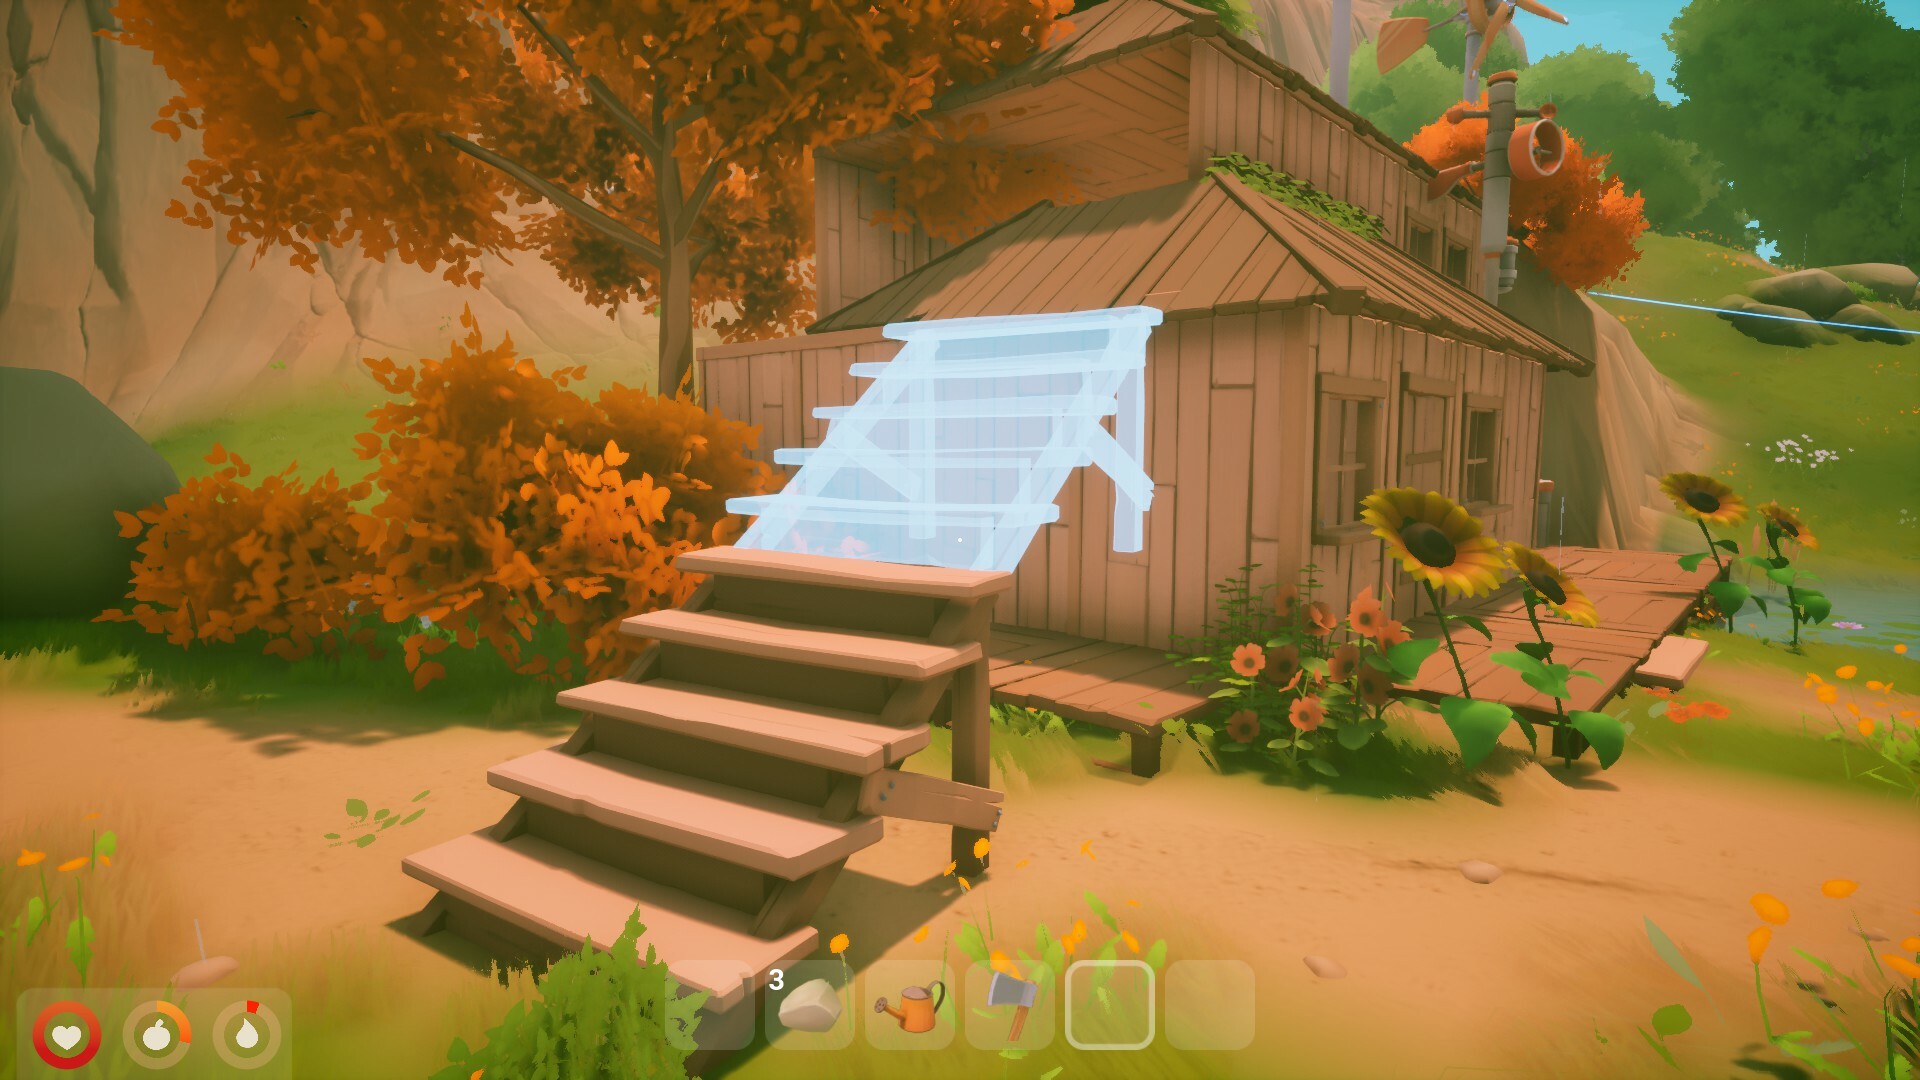 Our survival crafting game Solarpunk will launch its Kickstarter campa